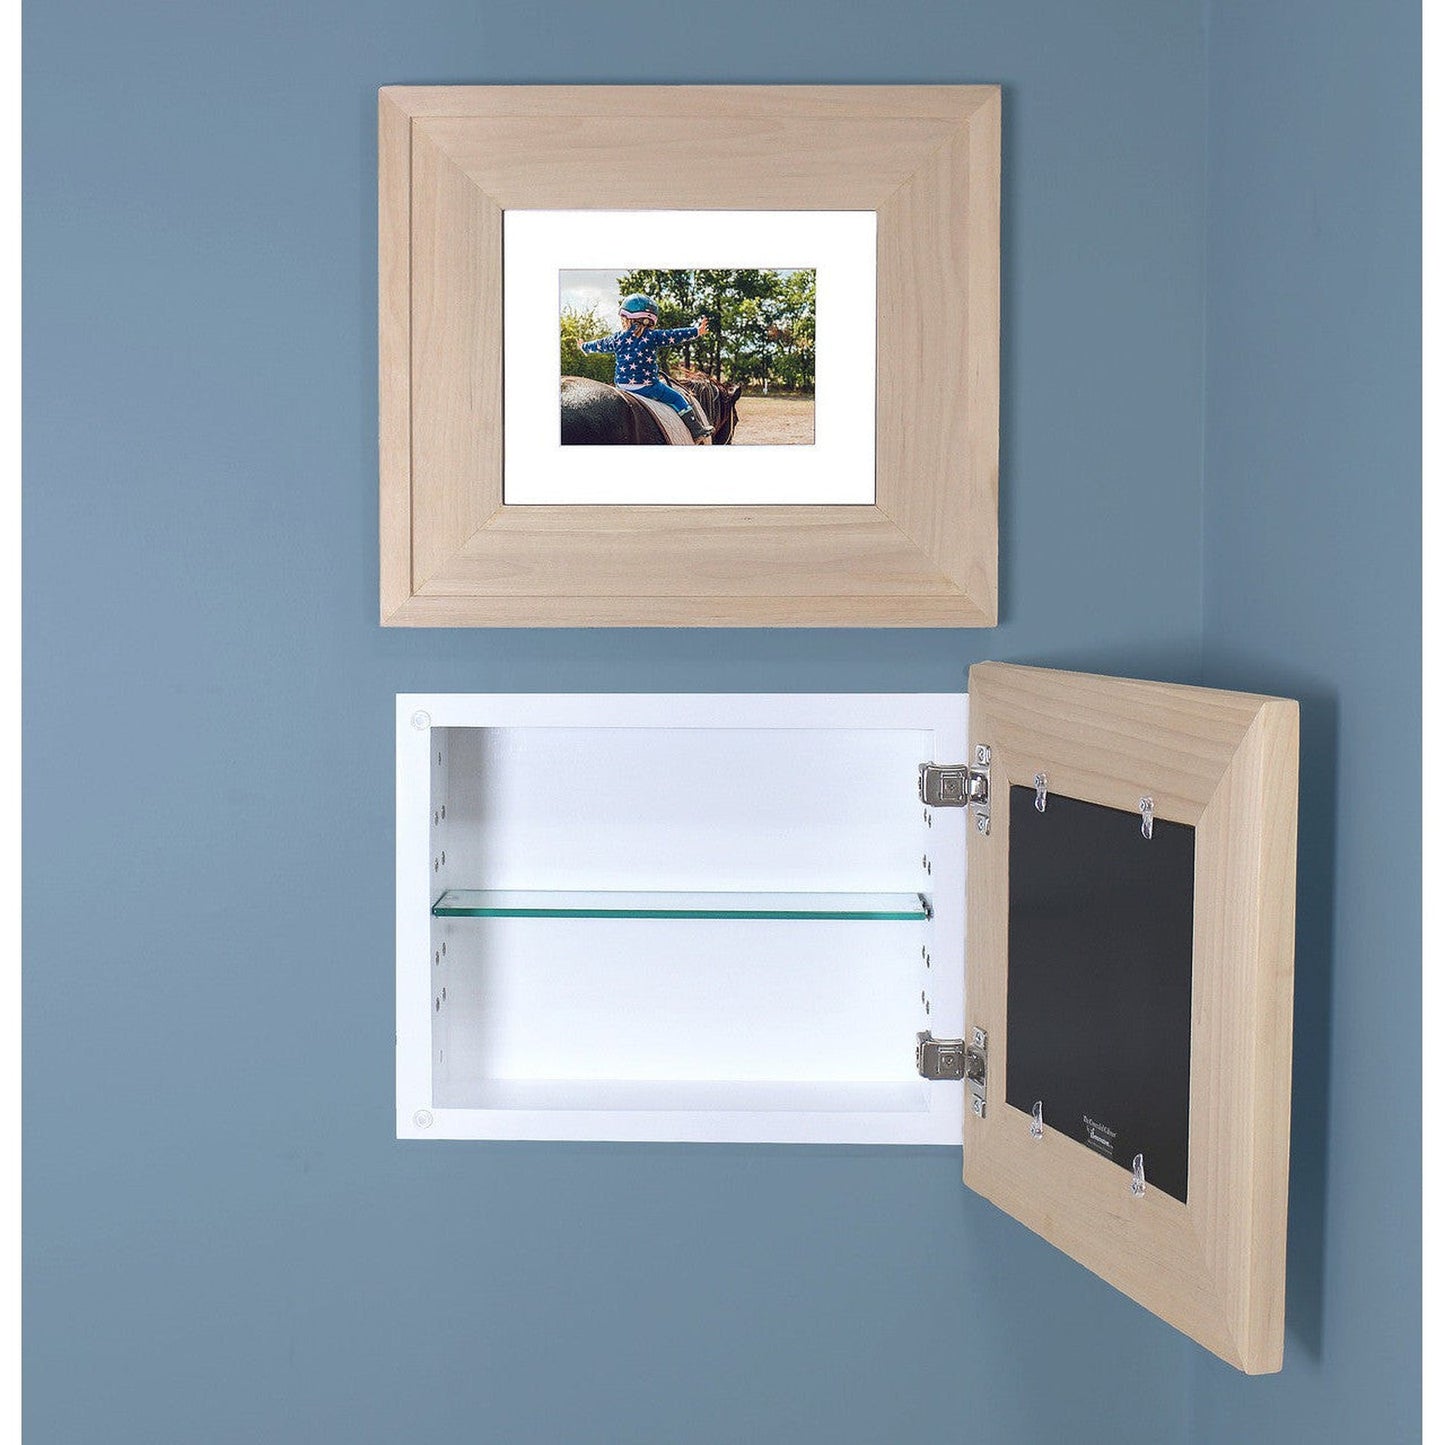 Fox Hollow Furnishings 14" x 11" Unfinished Raised Edge Compact Landscape Standard 4" Depth Recessed Picture Frame Medicine Cabinet With Mirror